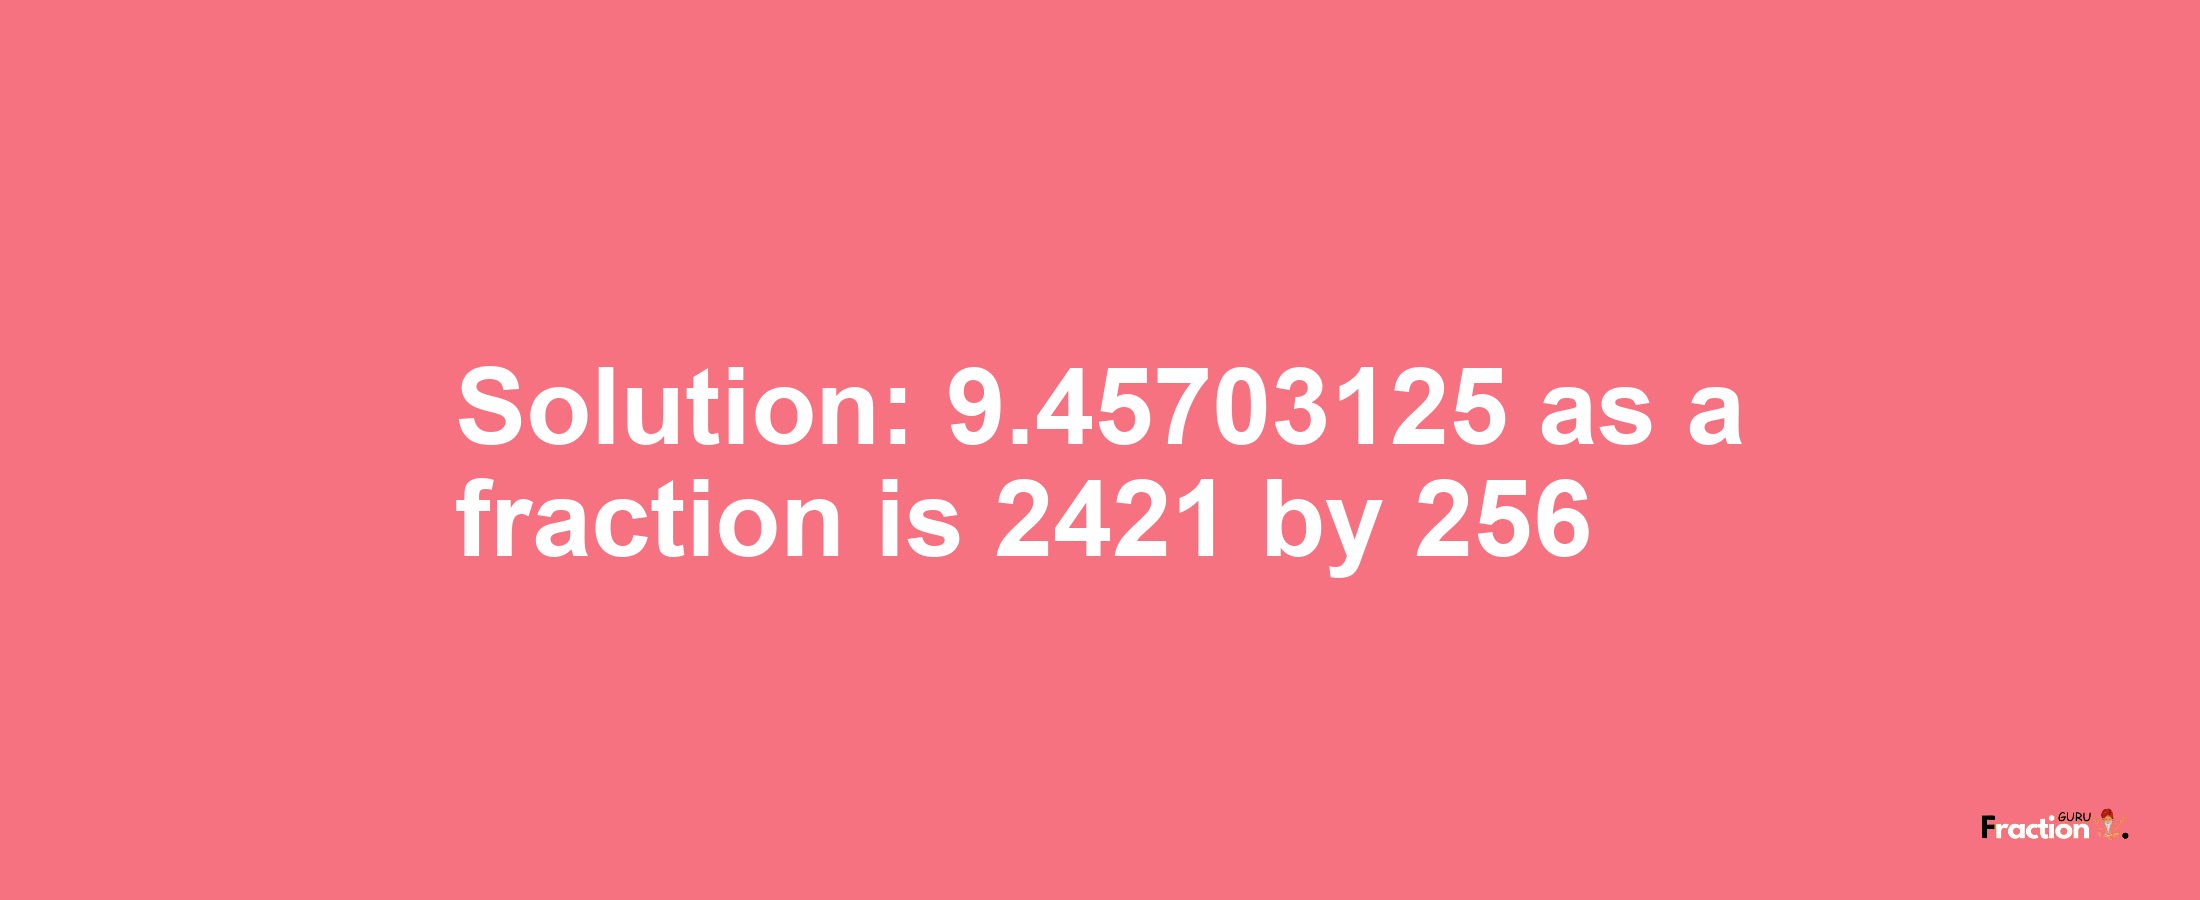 Solution:9.45703125 as a fraction is 2421/256